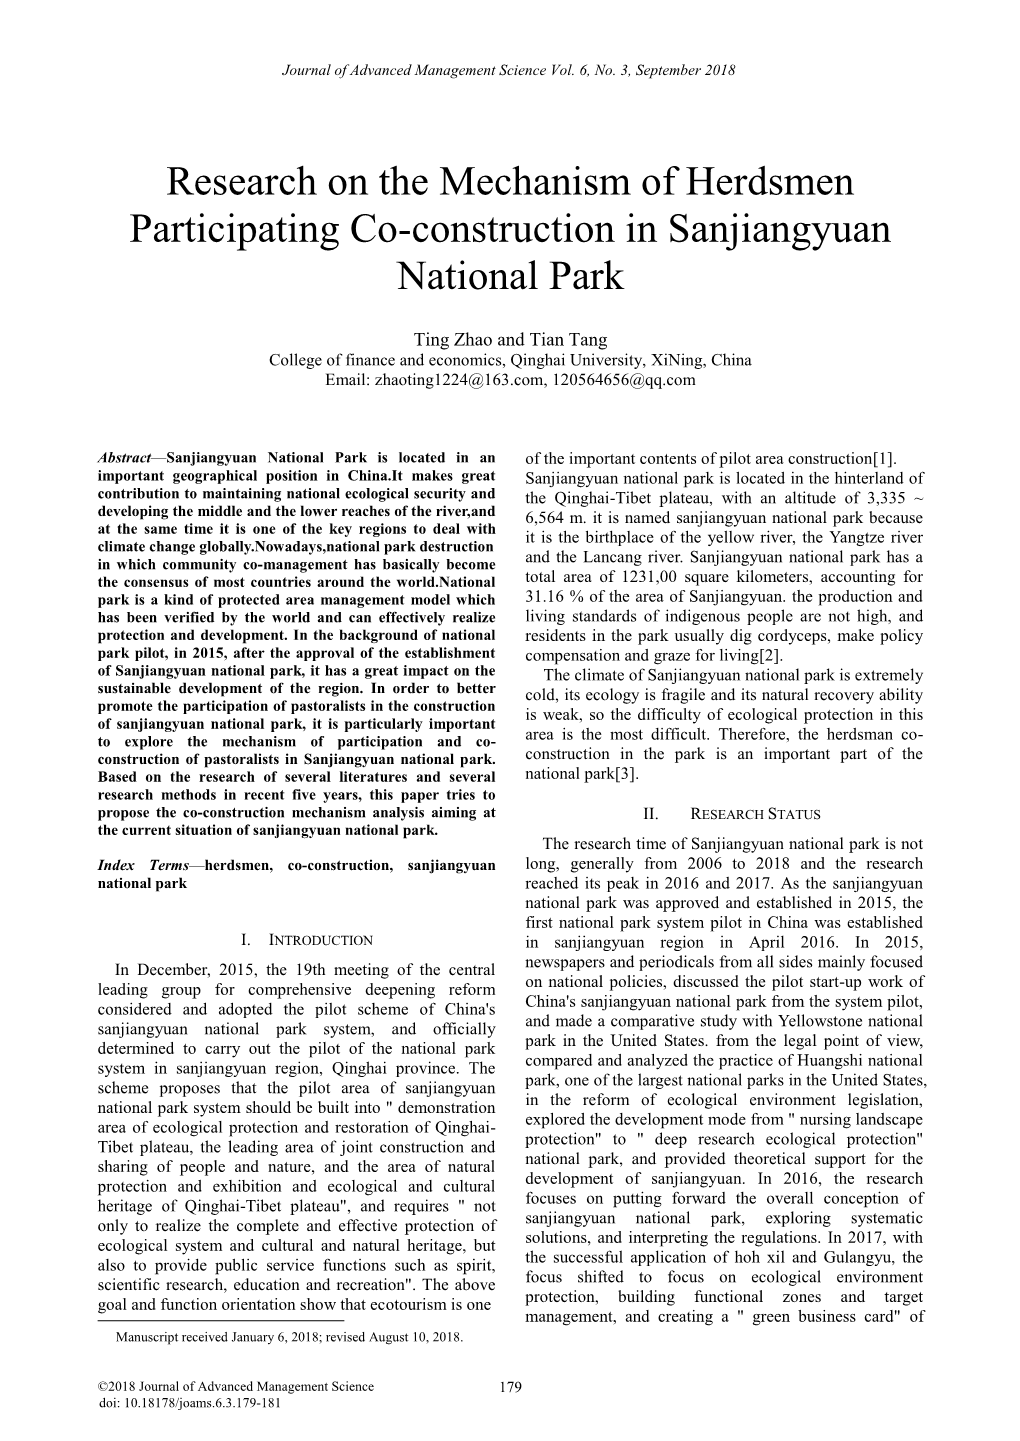 Research on the Mechanism of Herdsmen Participating Co-Construction in Sanjiangyuan National Park